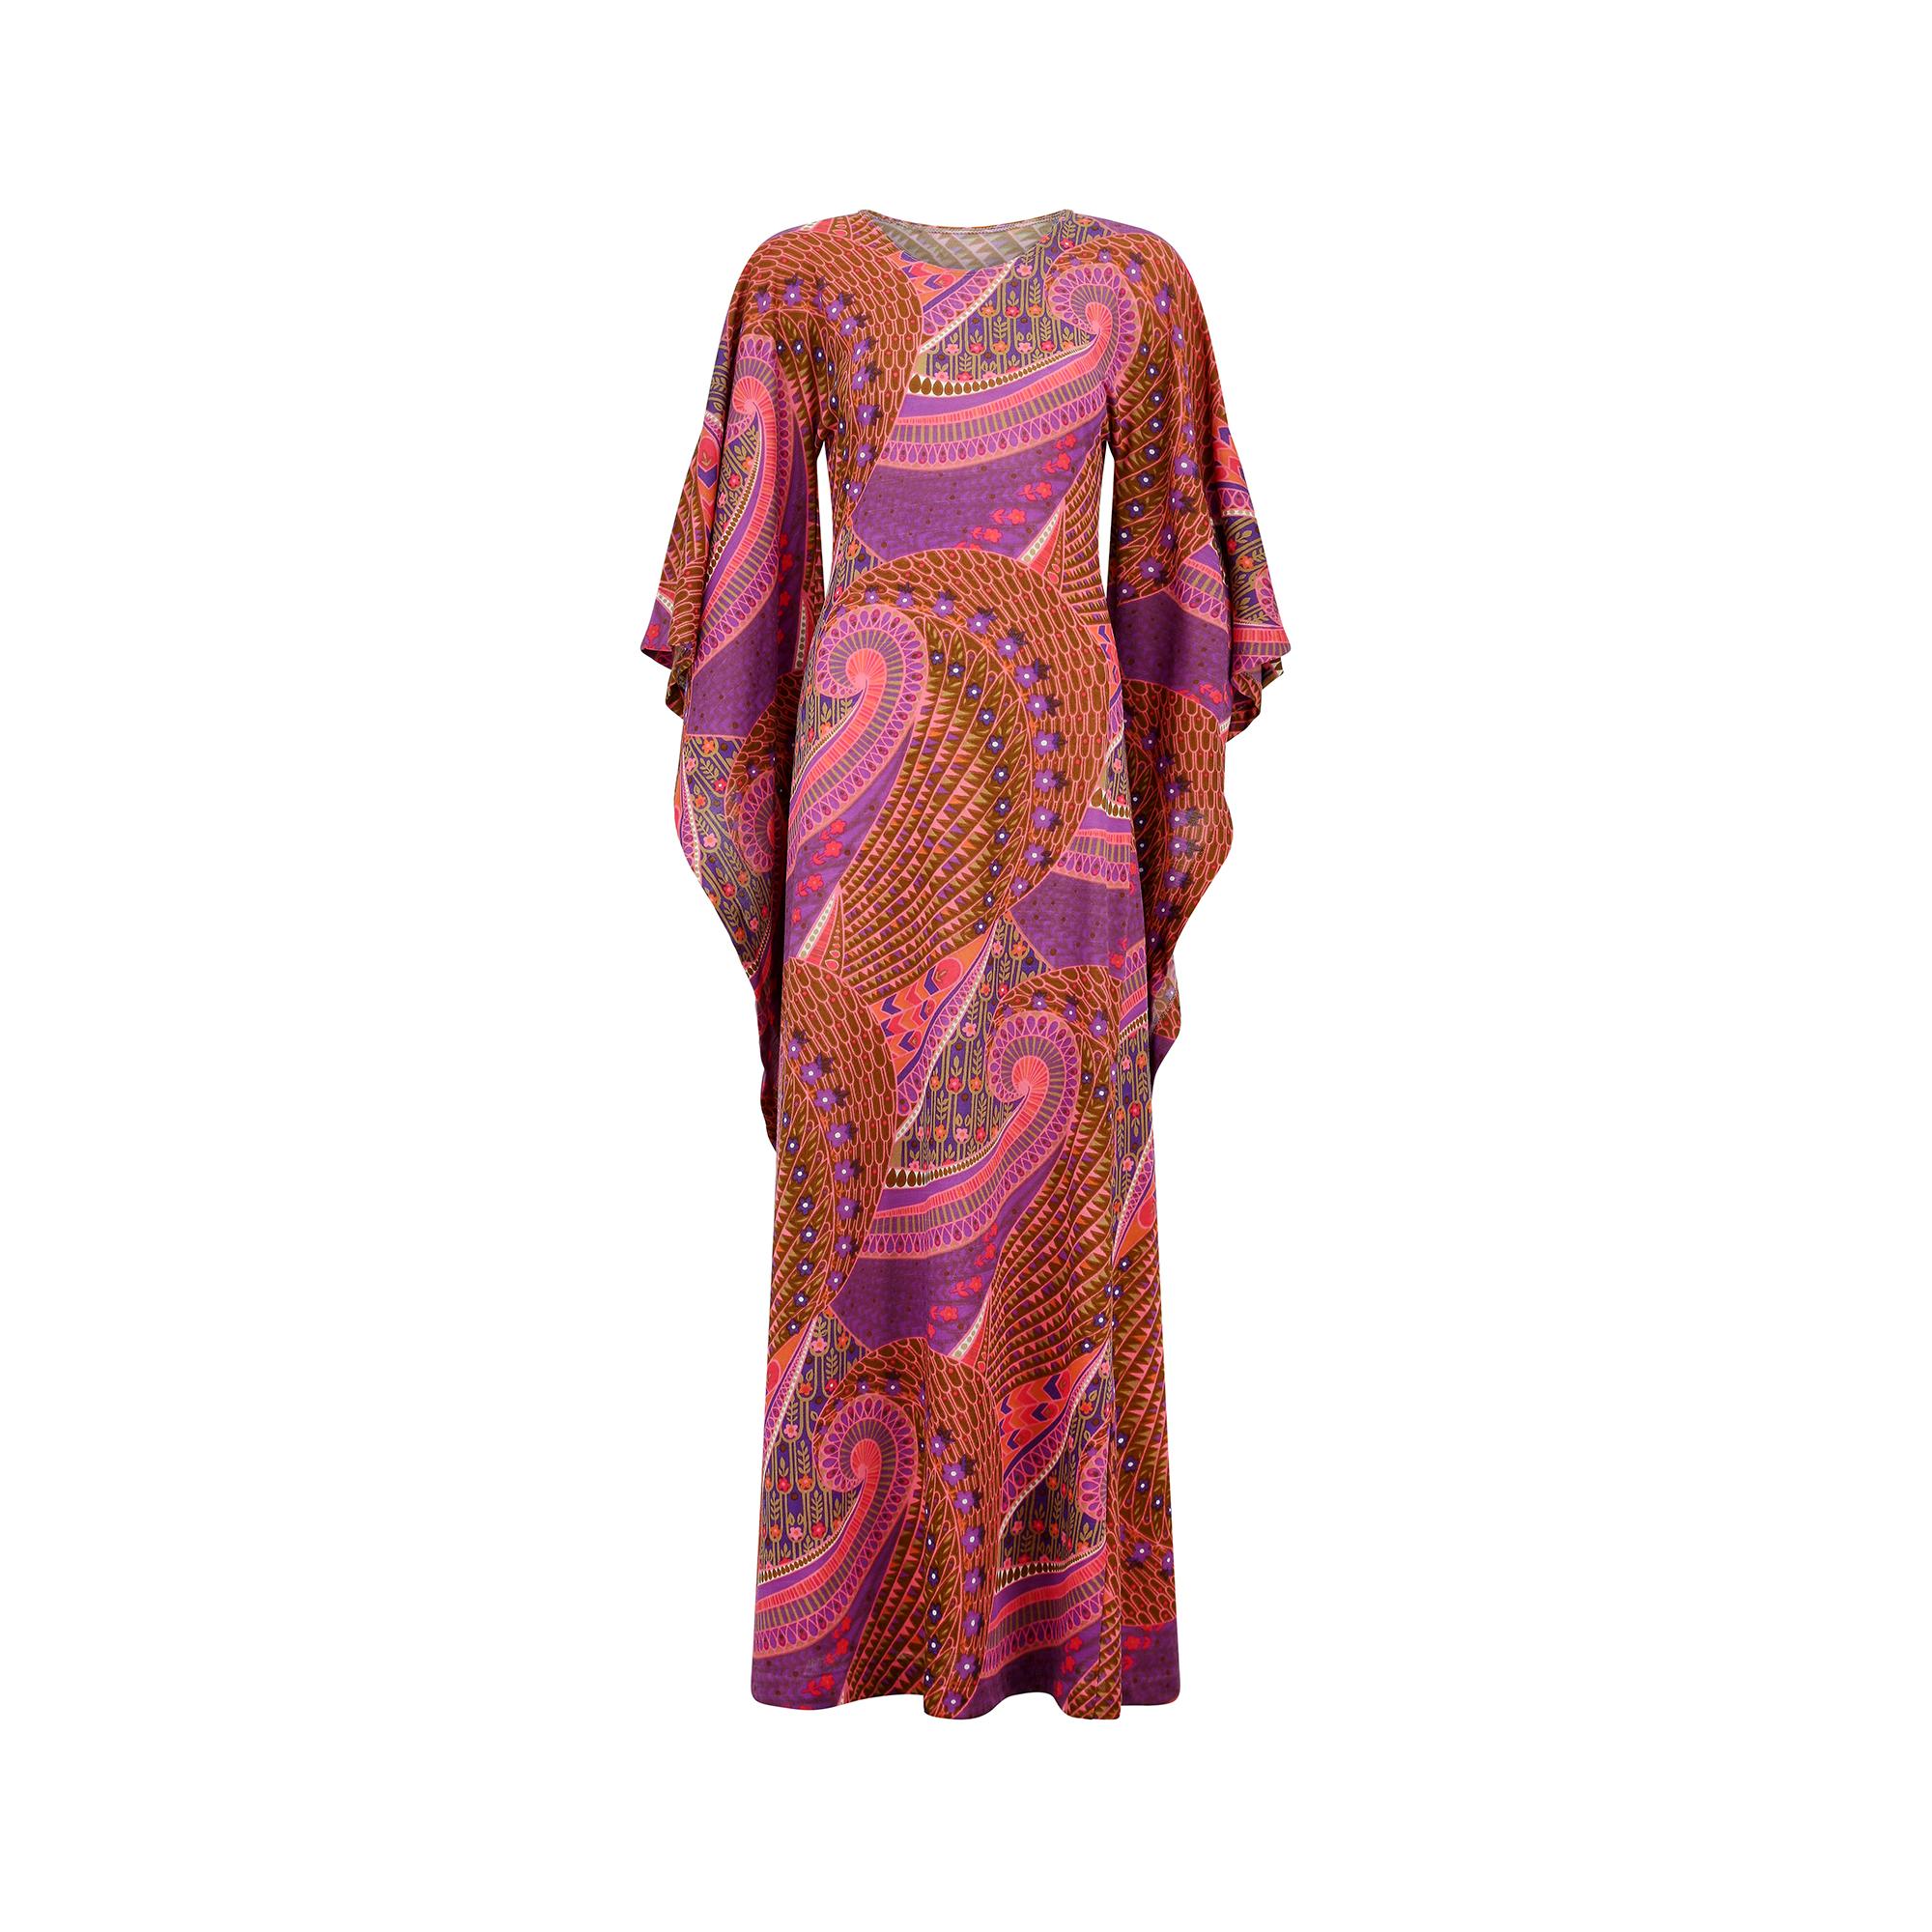 Fabulous 1970s angel sleeve psychedelic print dress cut in a classic elongated sheath shape with long flowing skirt and rounded neckline. It features a striking print in a distinctive paisley design, with floral details and in shades of purple, deep